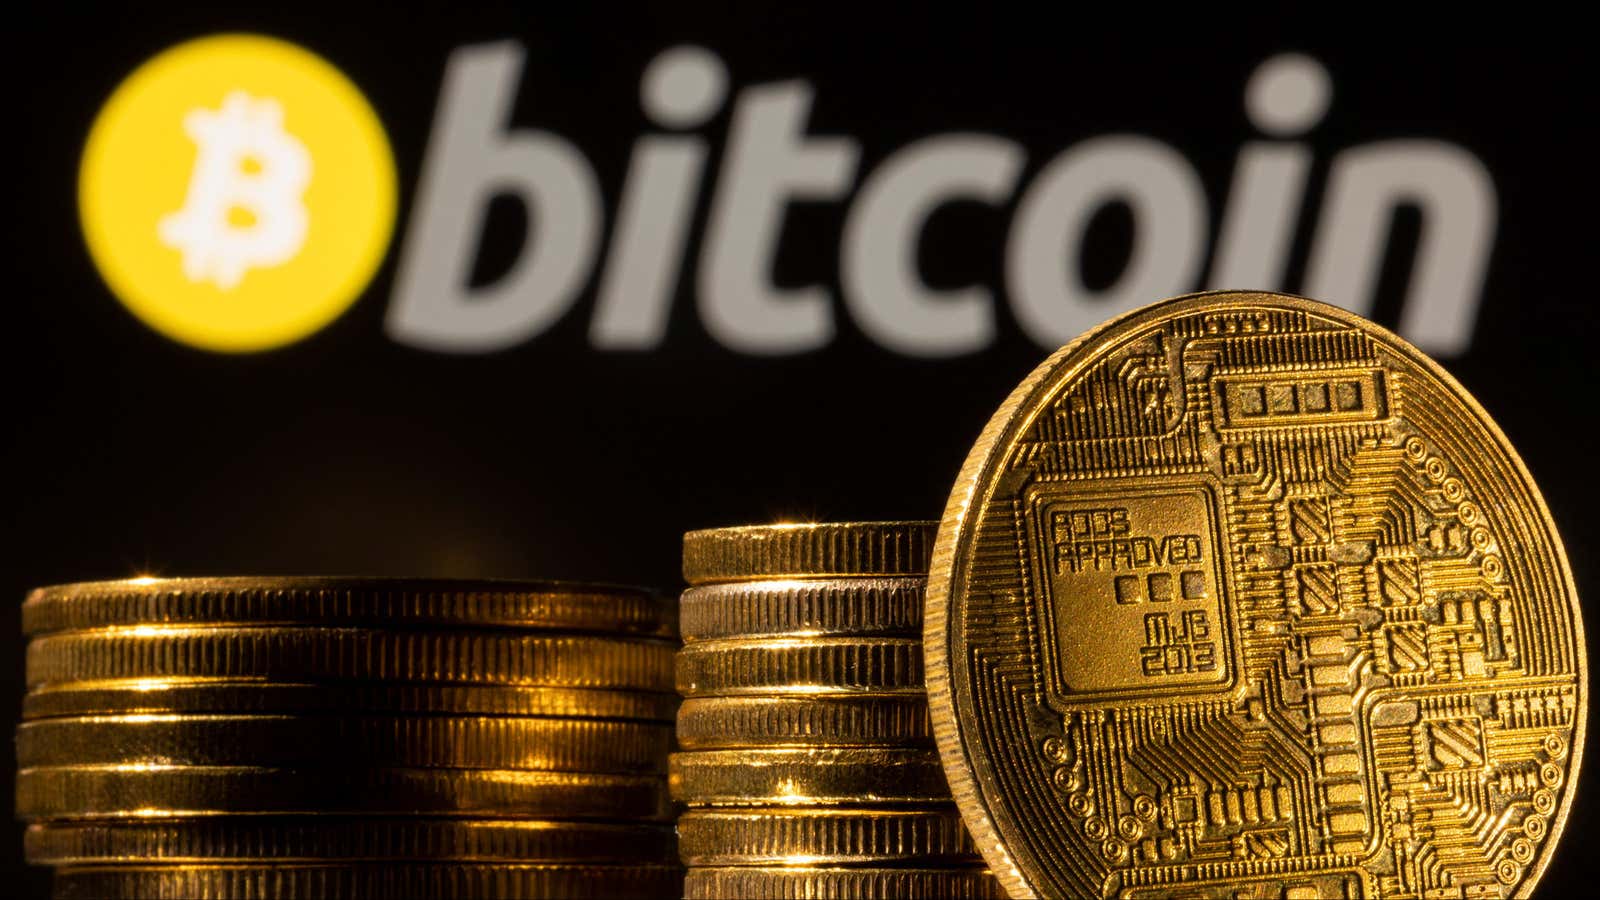 The Central African Republic has overtaken regional cryptocurrency front-runners such as Kenya and Nigeria to become the continent’s first nation to officially adopt Bitcoin as legal tender.